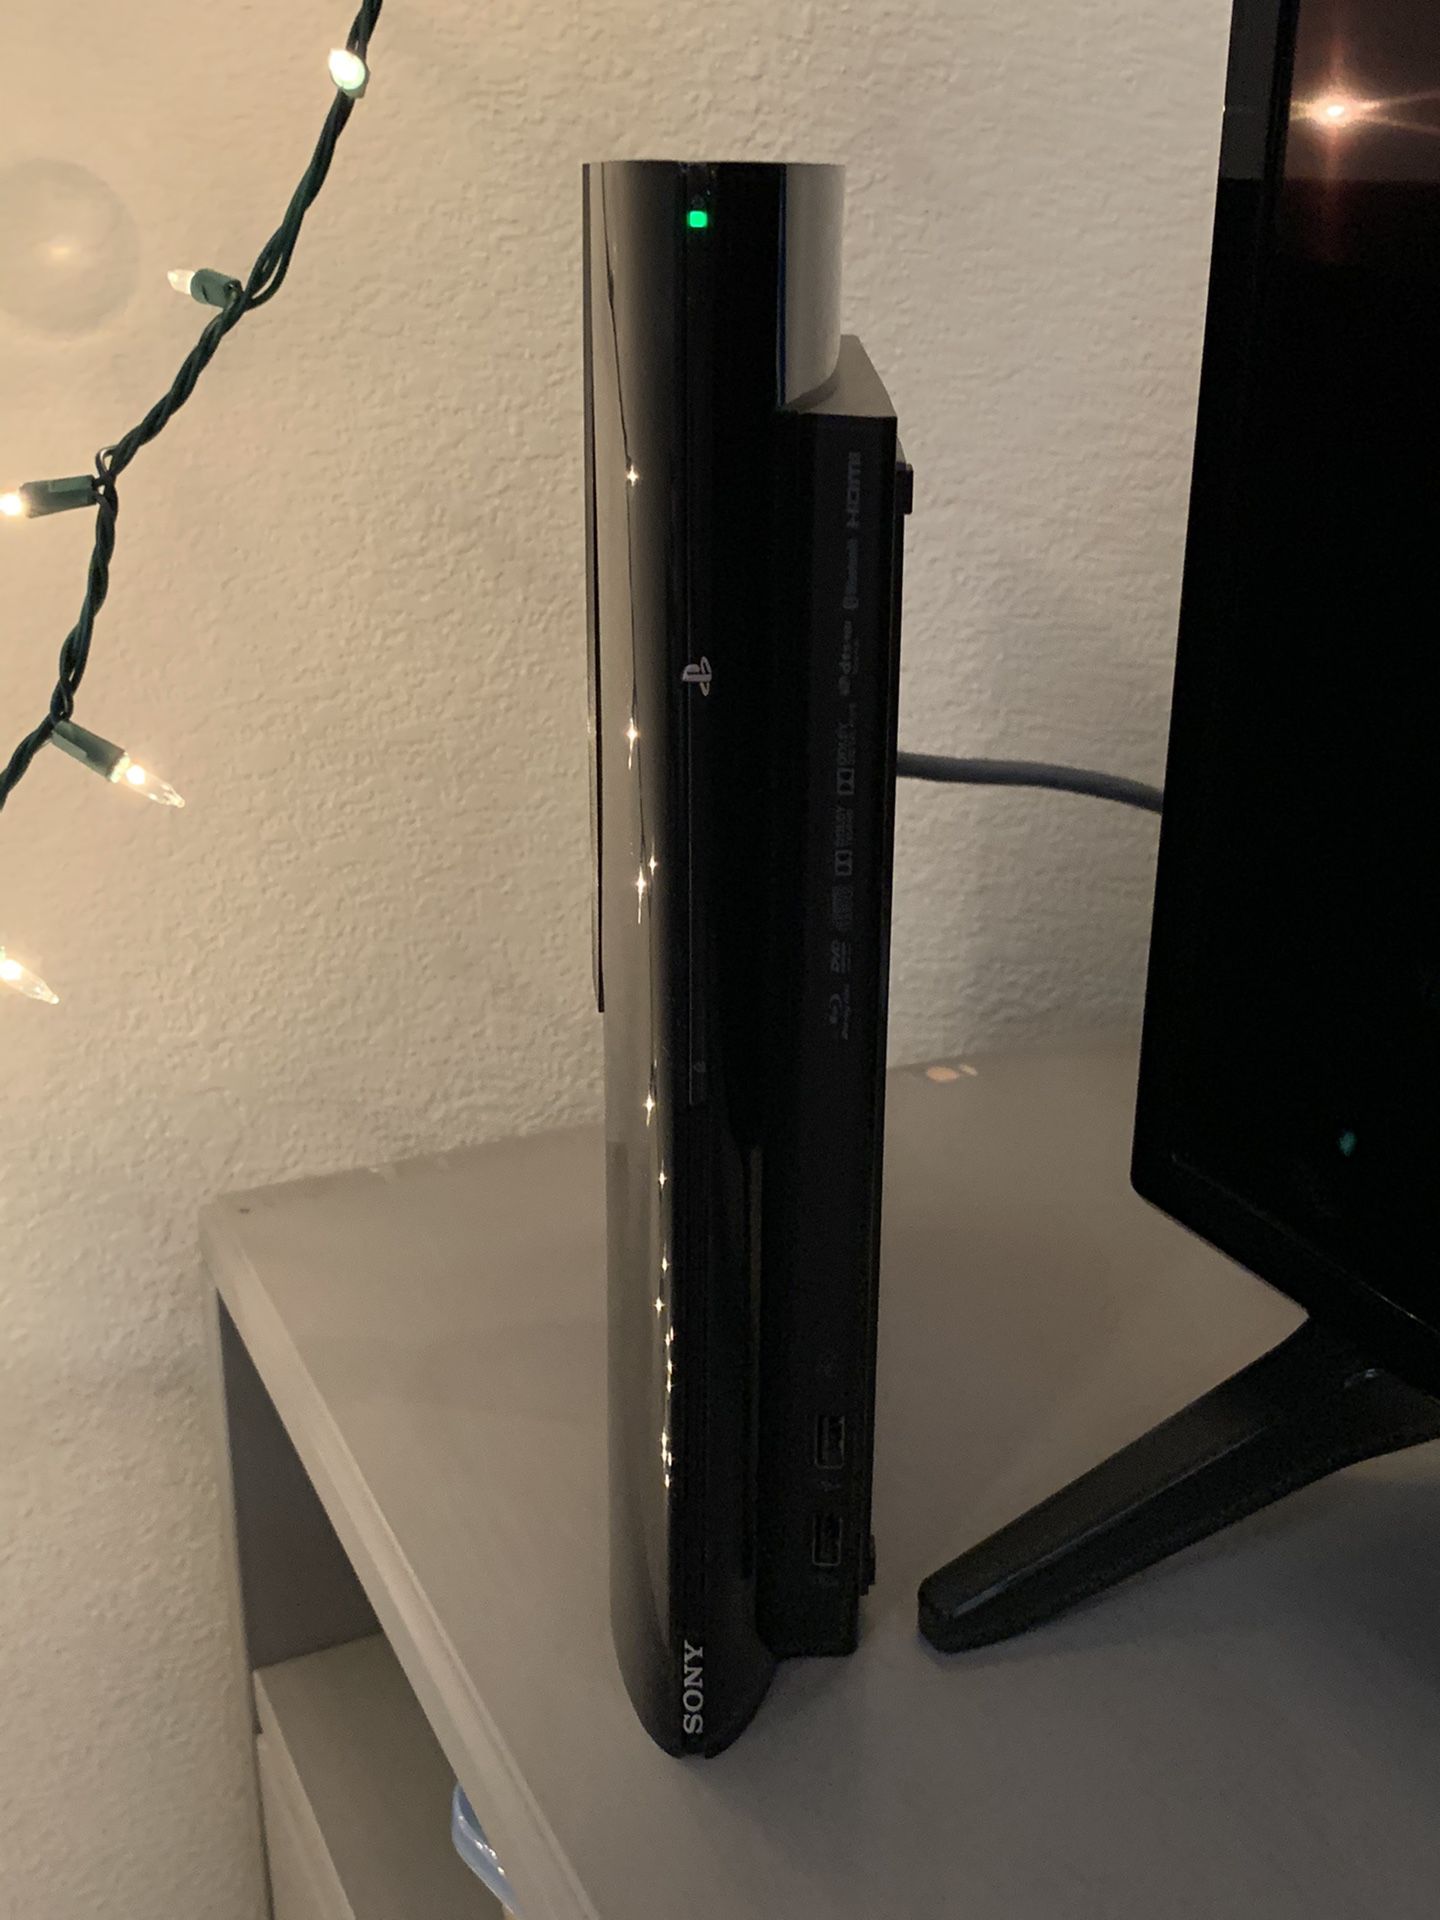 PS3 Slim, 2 controllers, charging stand, 9 games